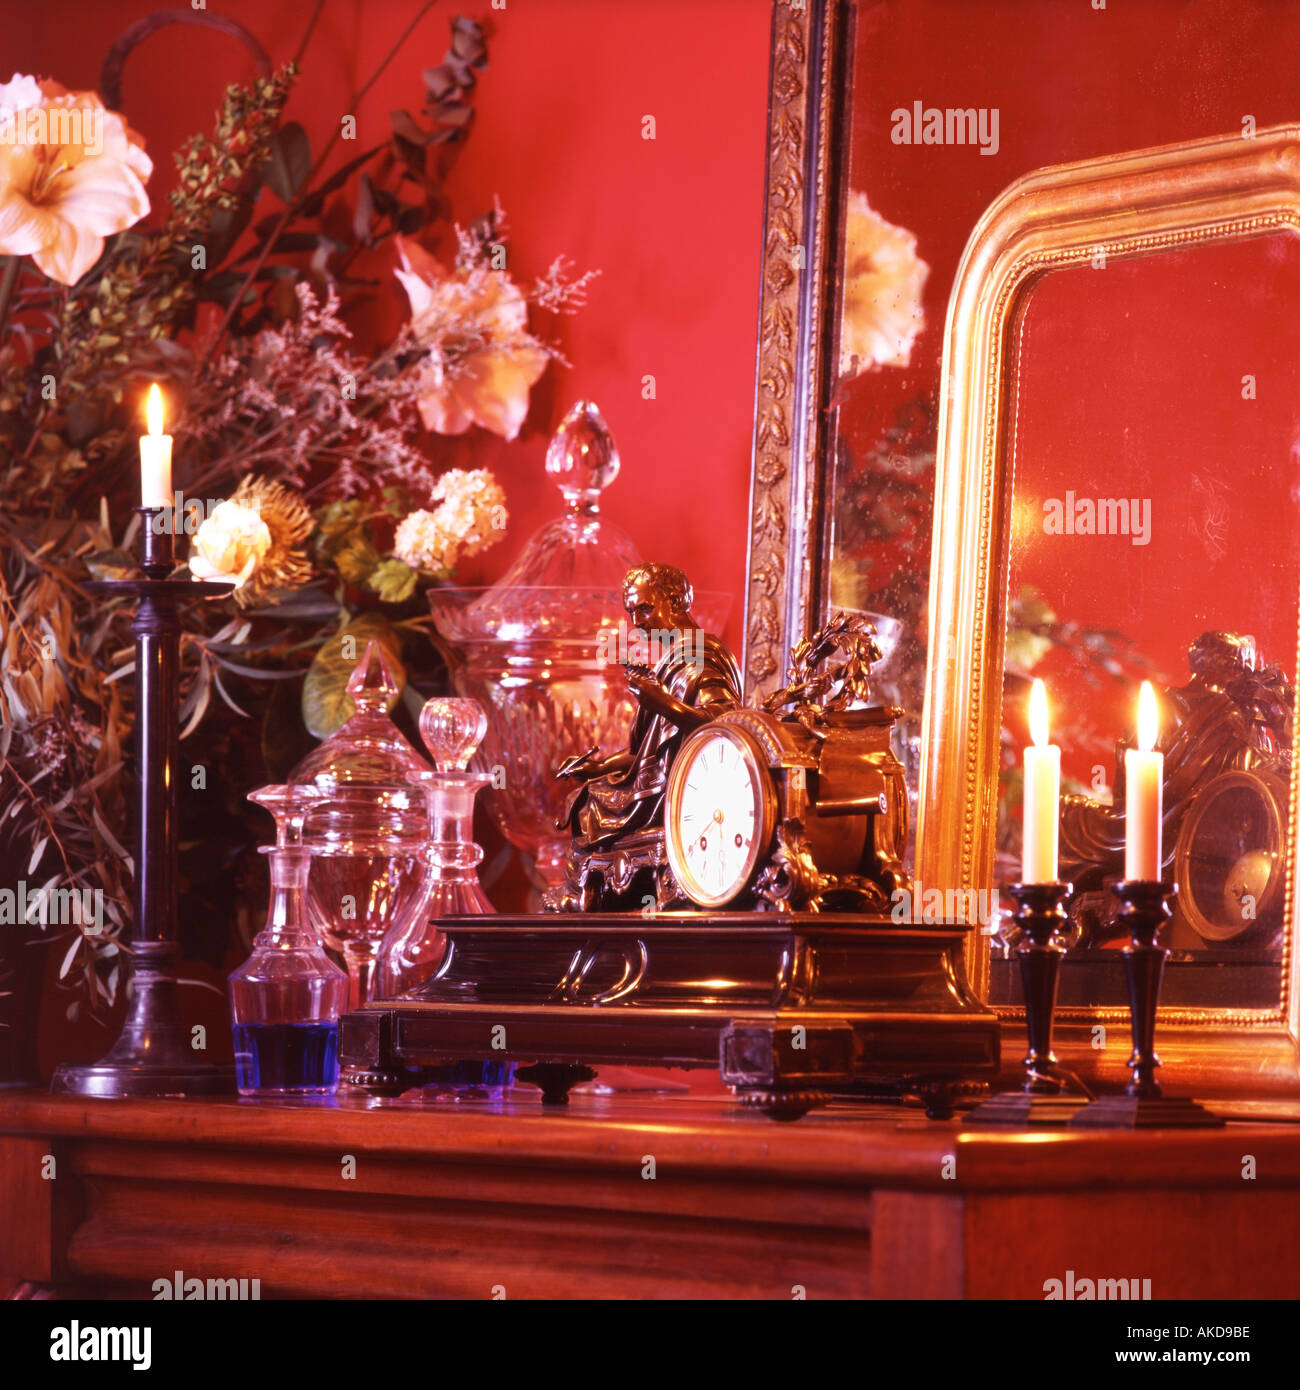 Antique bronze clock with sitting male figure with crystal decanters and flowers and mirrors in front of a red wall Stock Photo